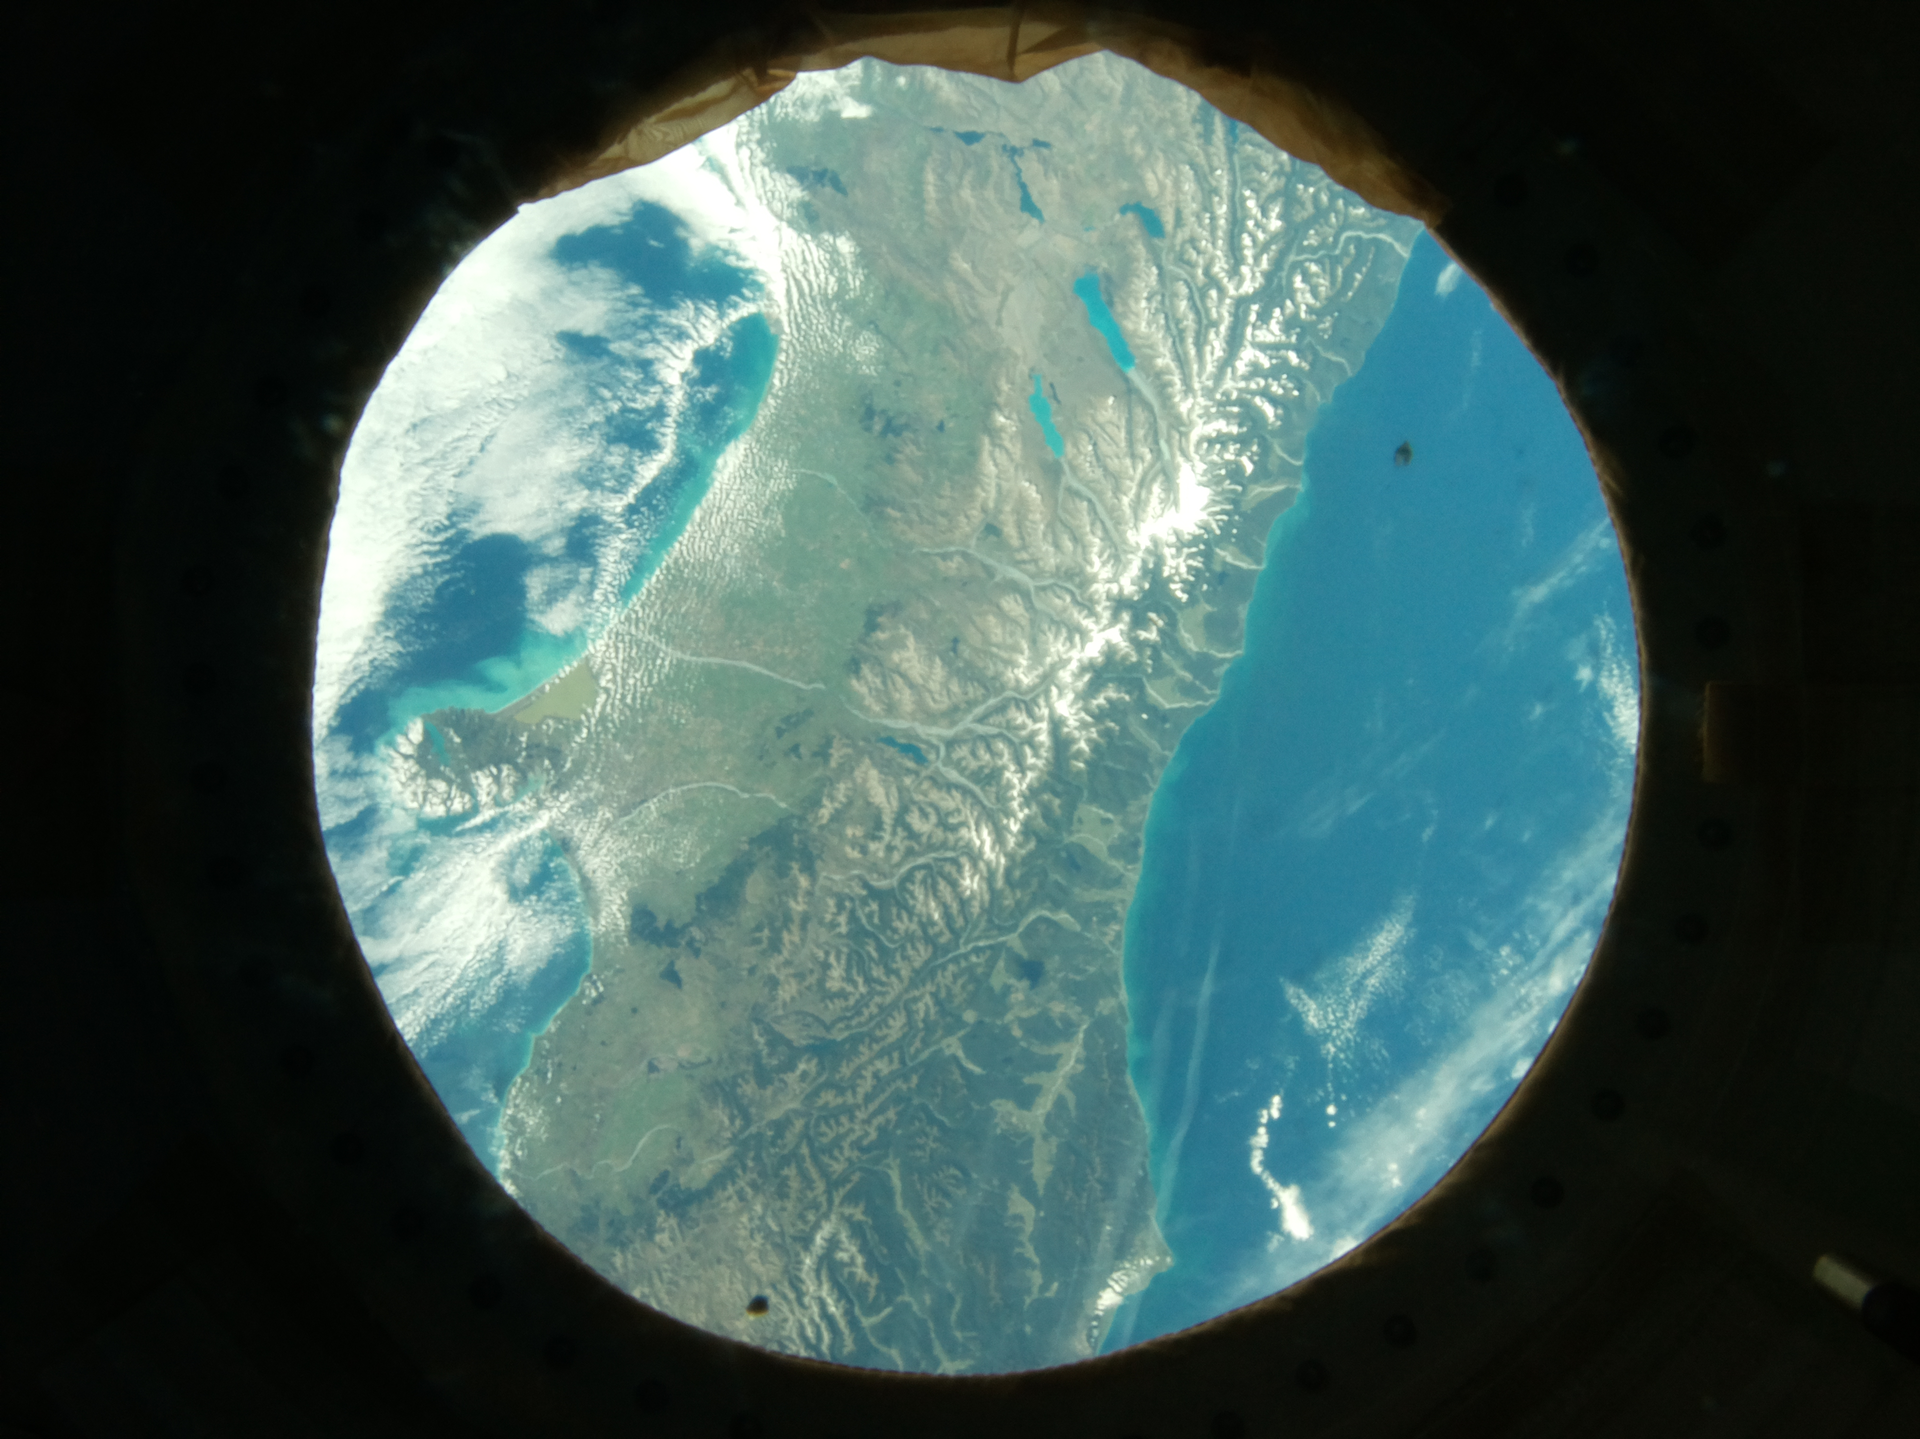 Picture taken from the ISS with the new Astro Pi VIS